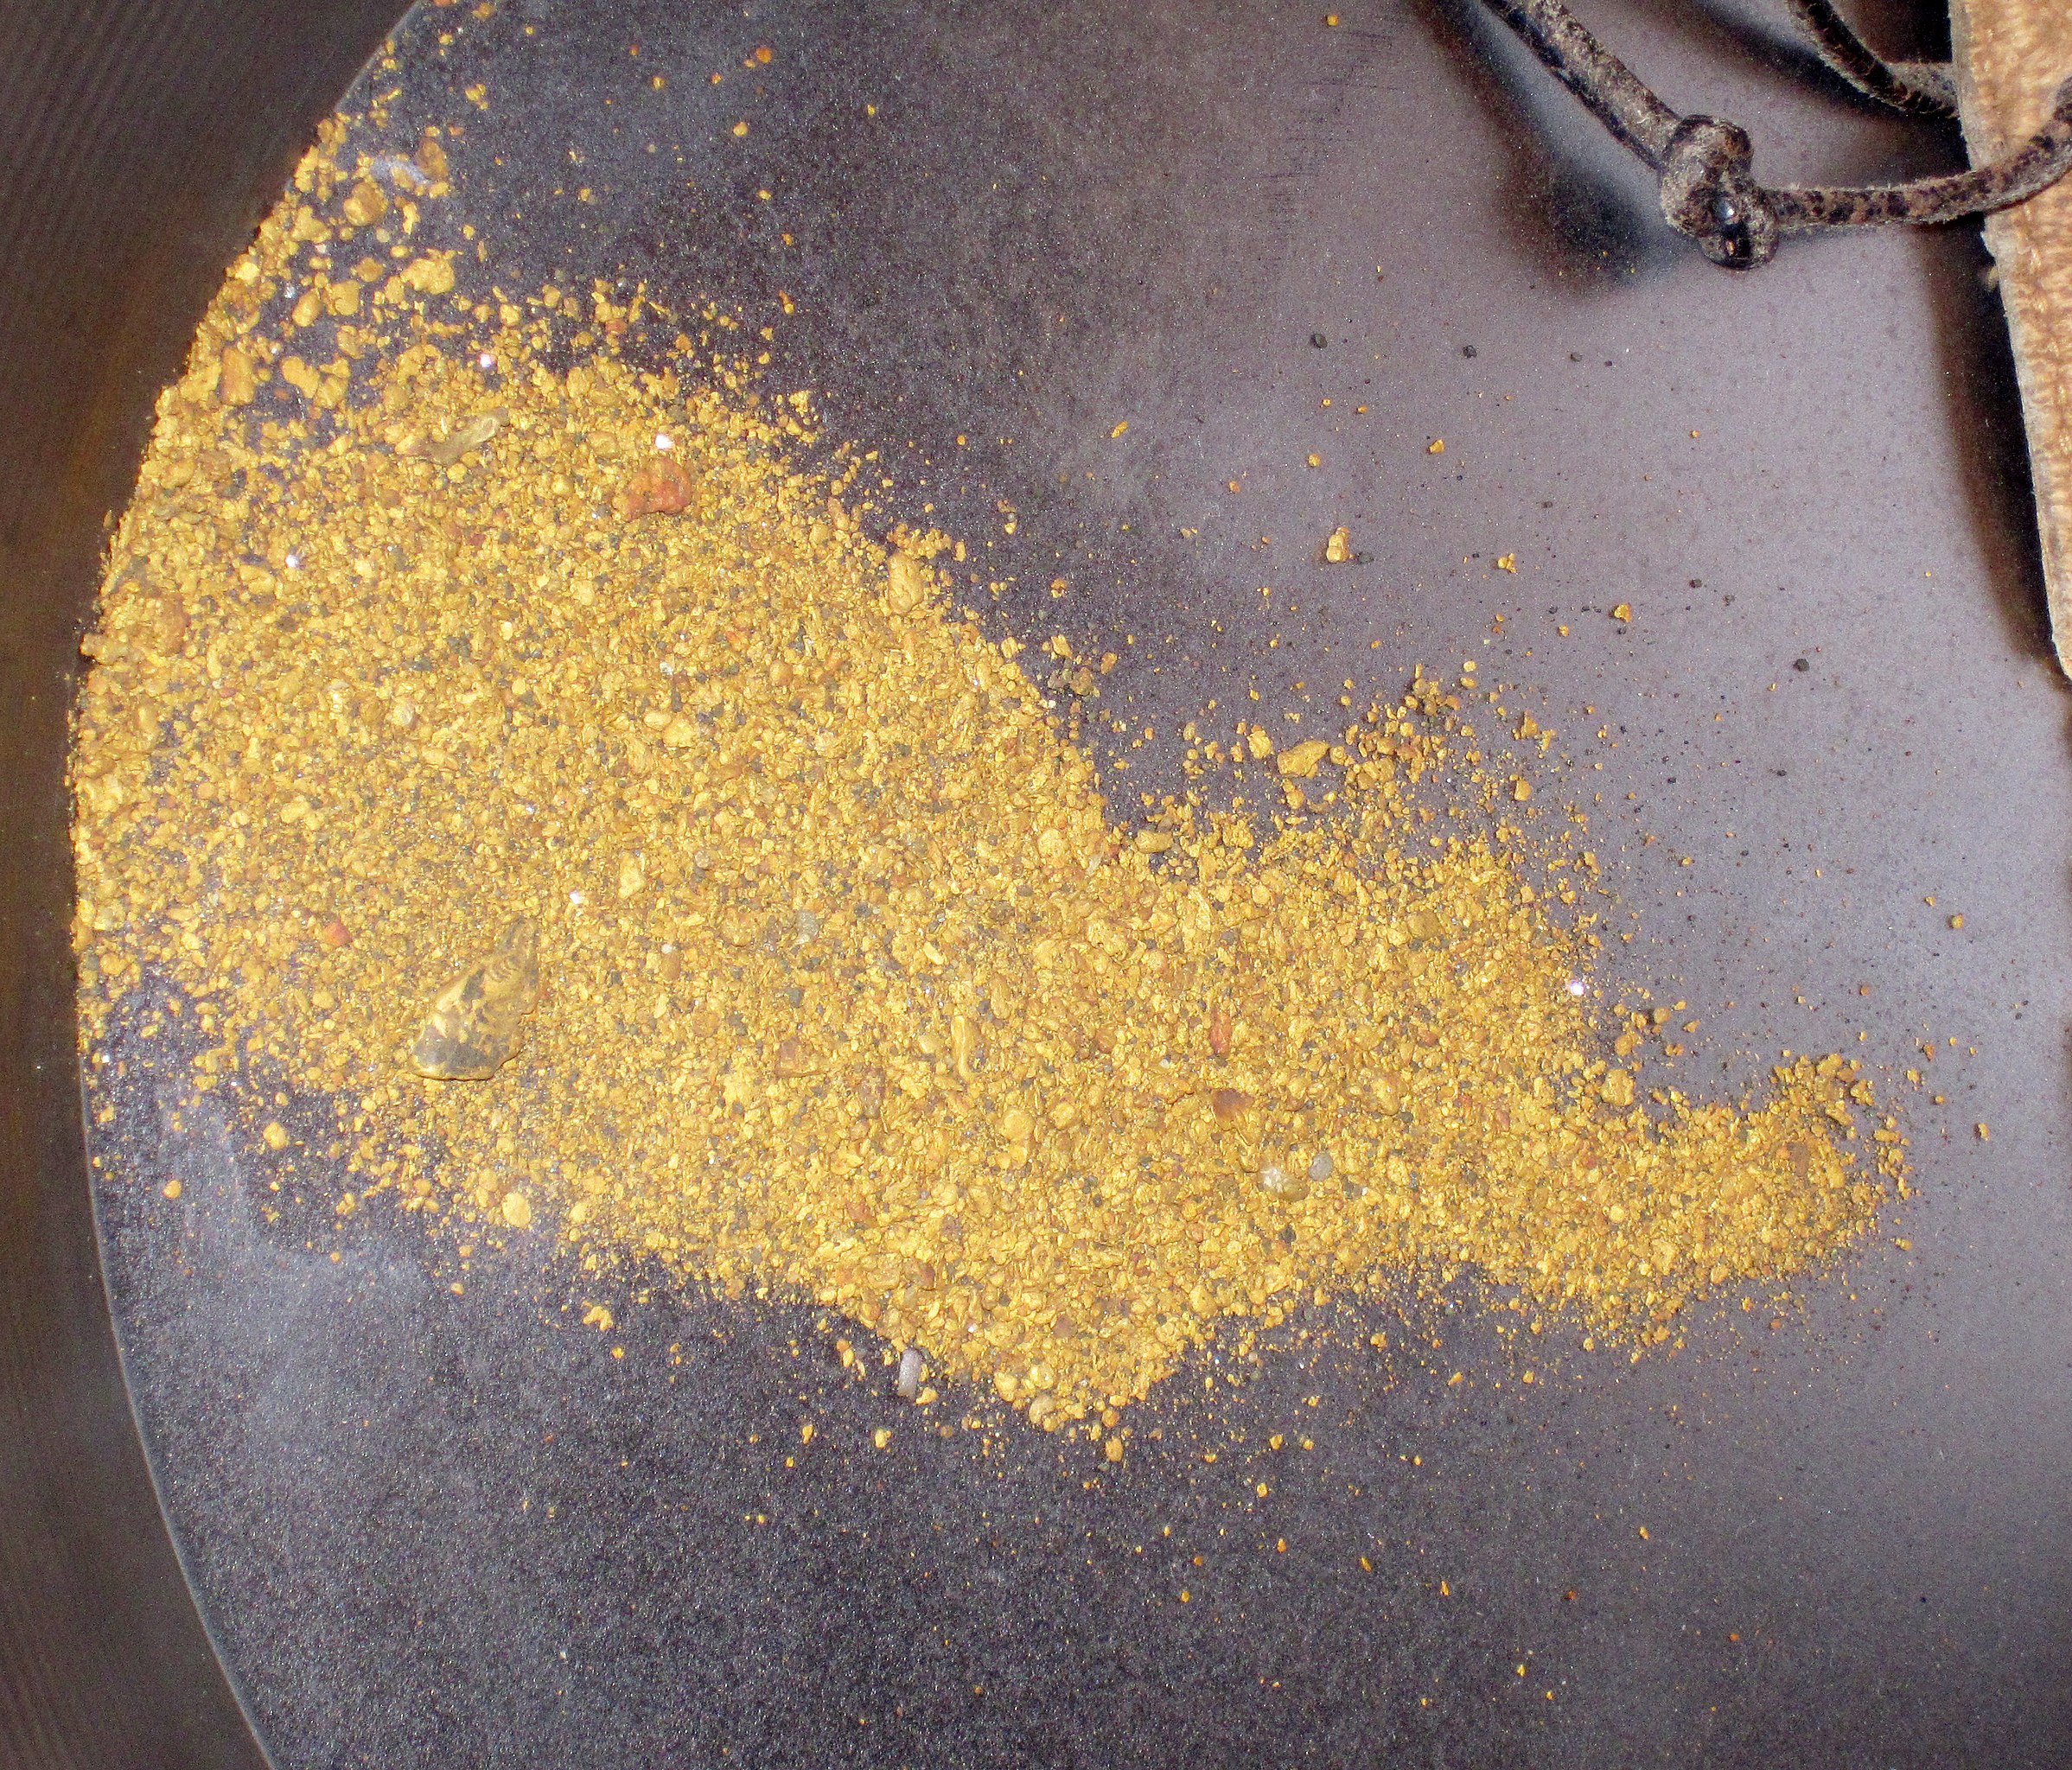 File:Gold dust (placer gold) 1 (16851203639).jpg - Wikimedia Commons